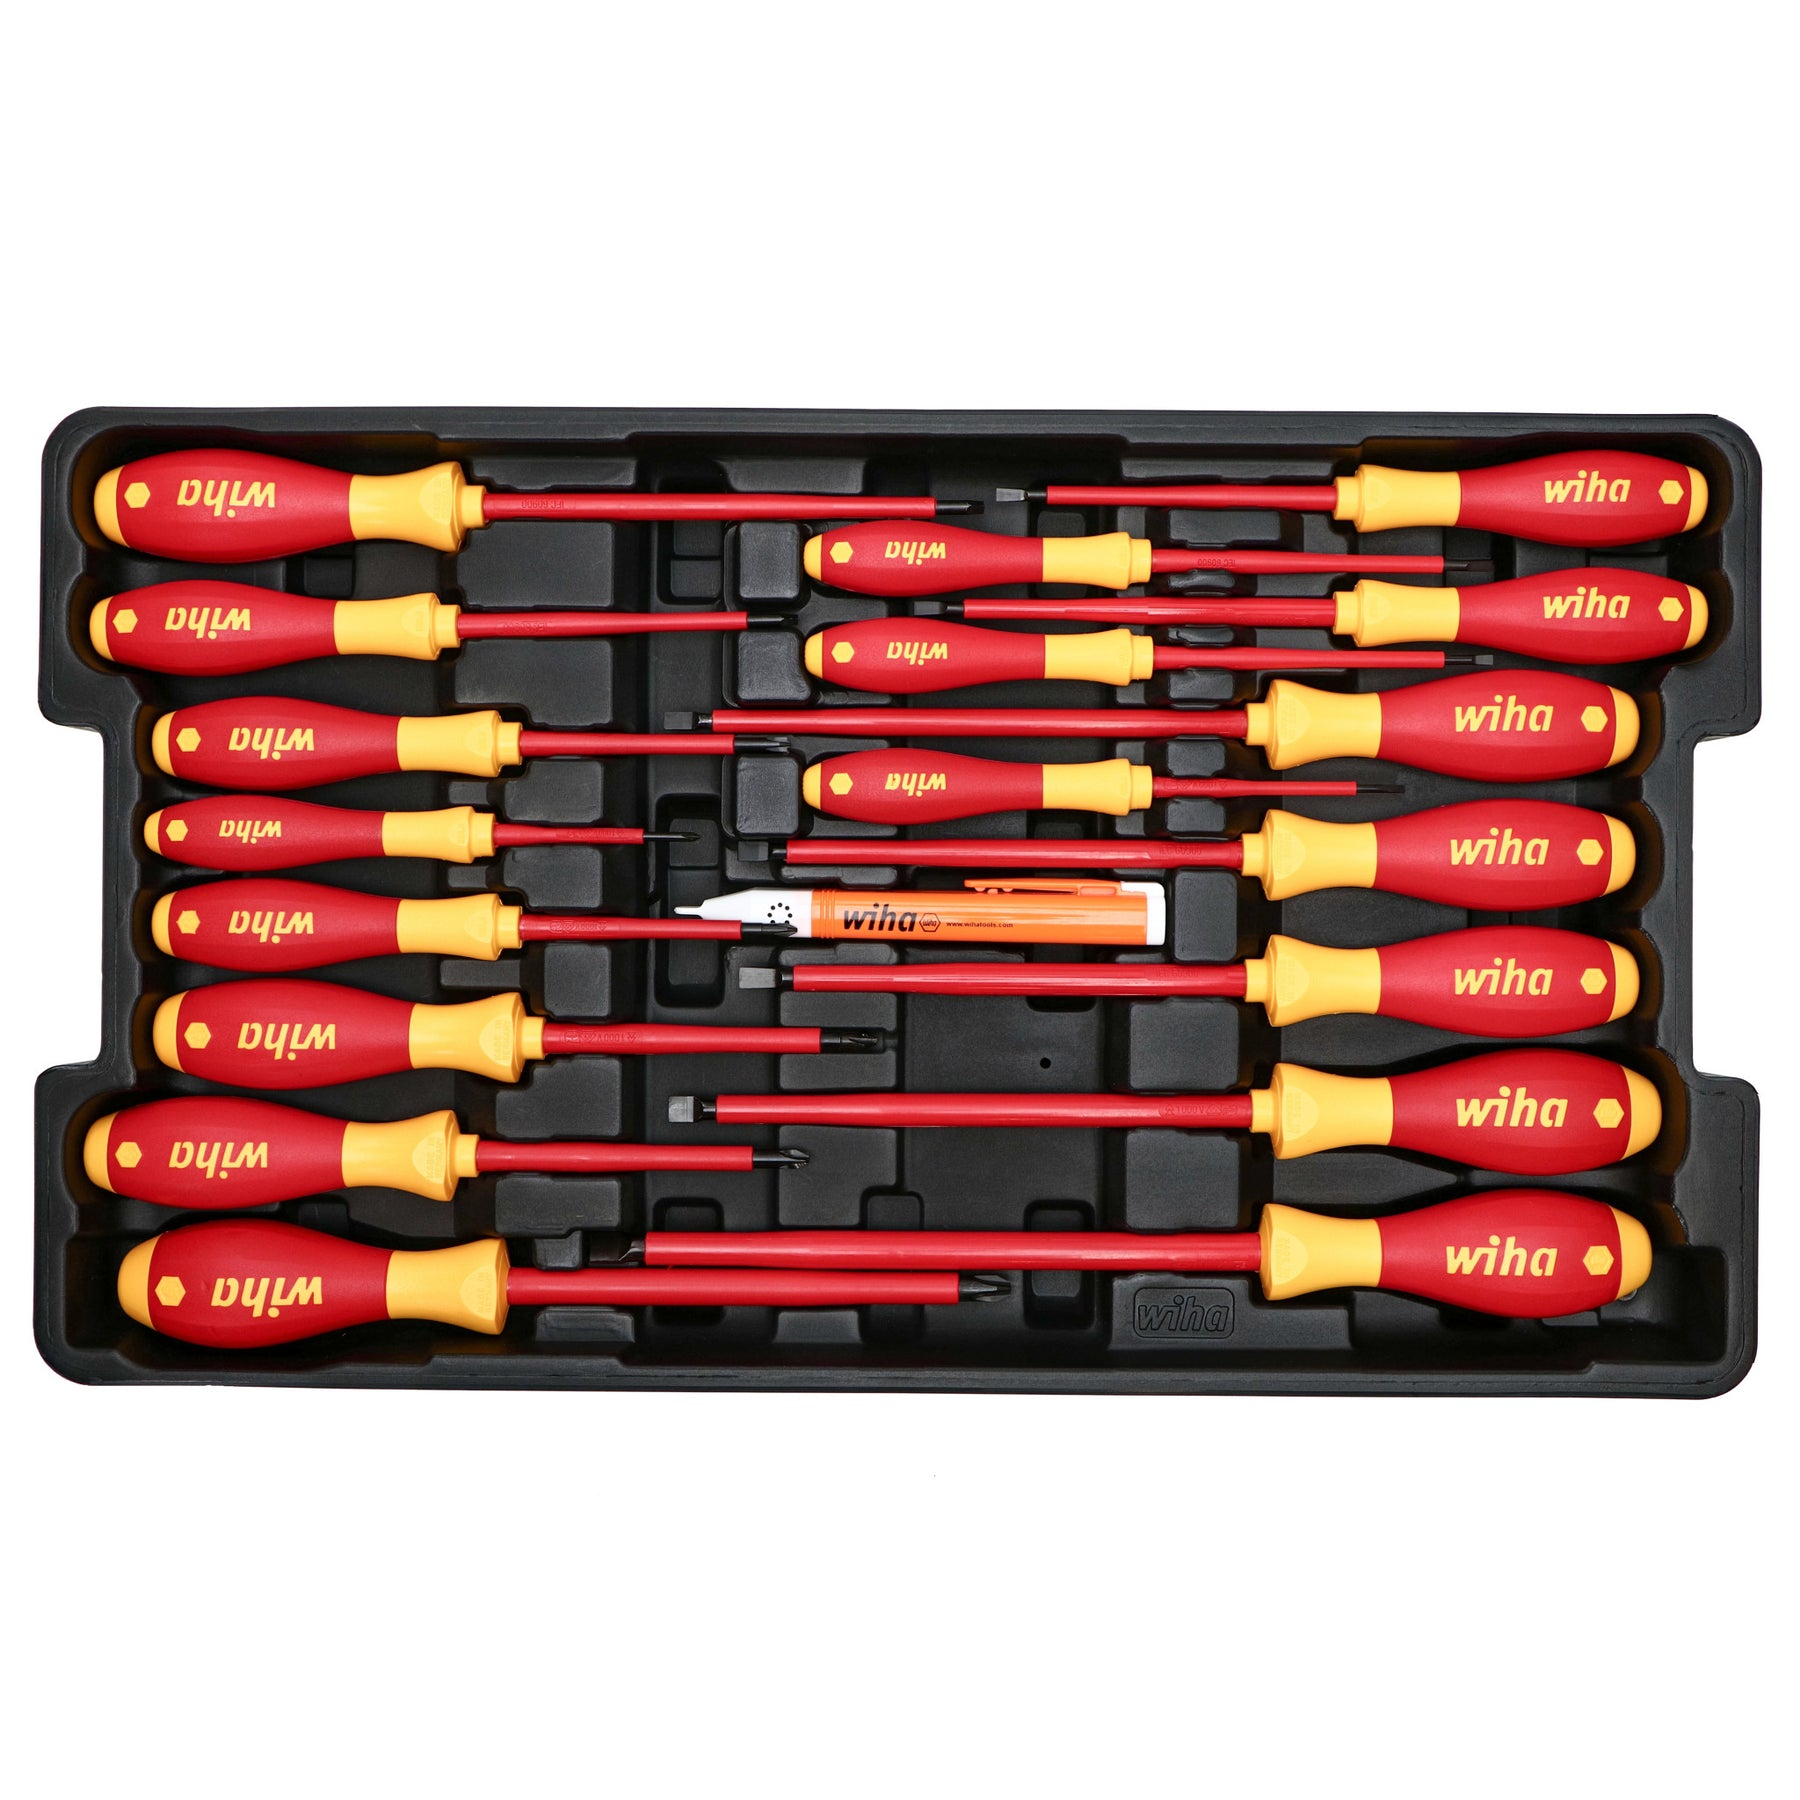 80 Piece Master Electrician's Insulated Tools Set In Rolling Hard Case